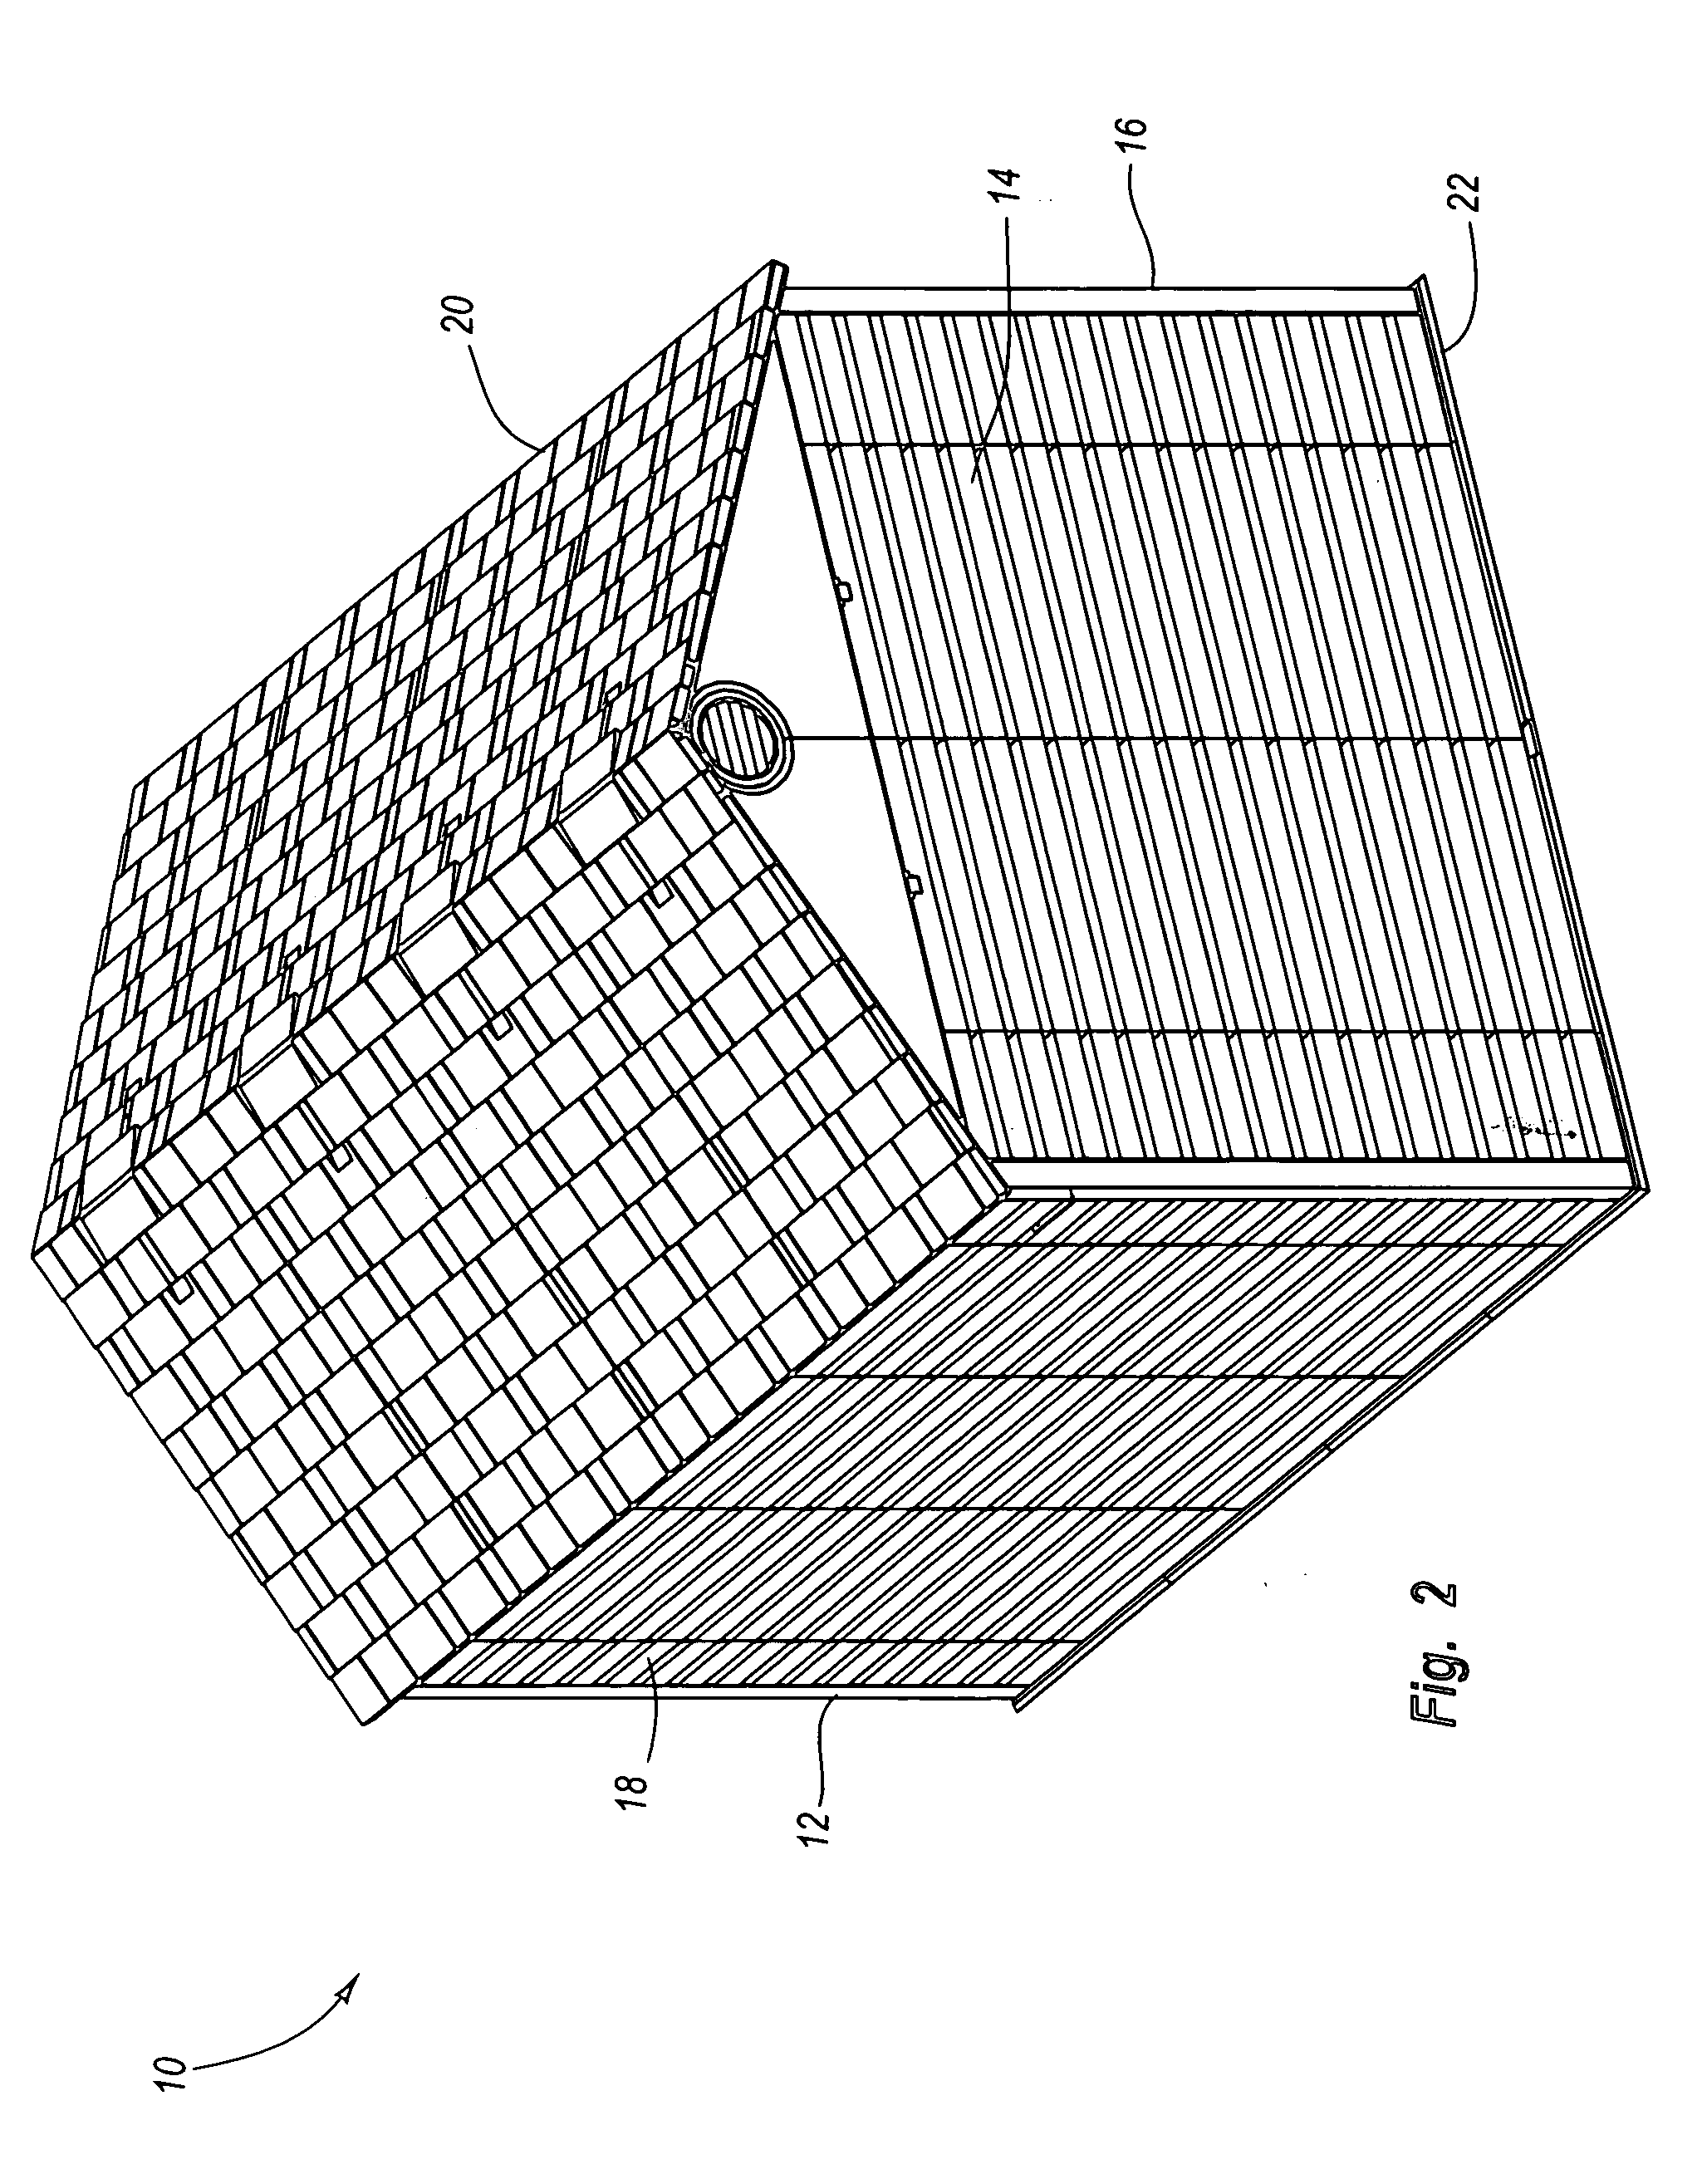 System and method for constructing a modular enclosure